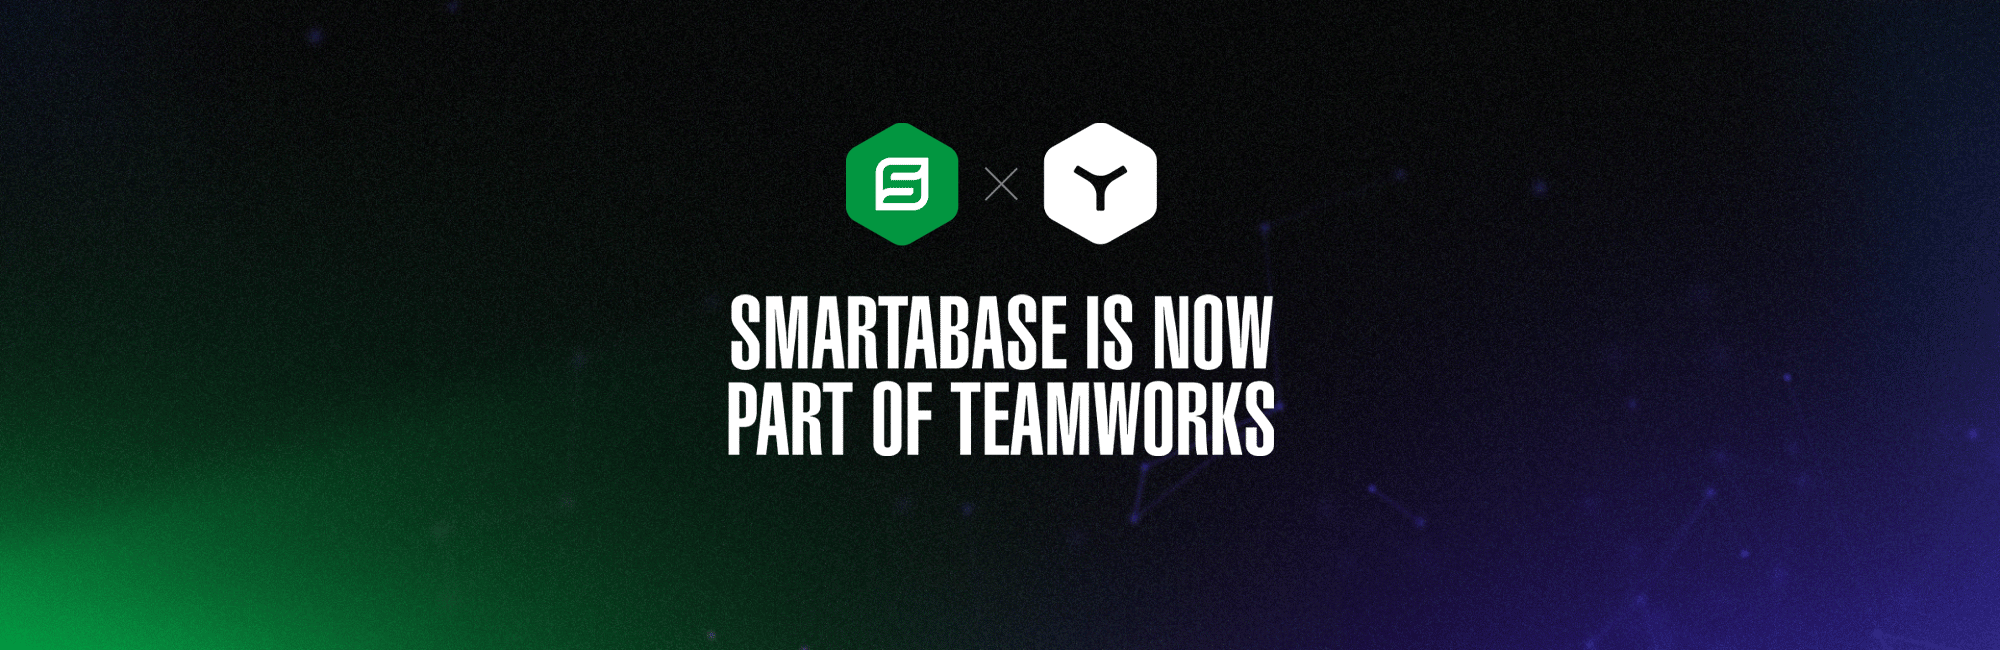 Letter From Smartabase's CEO